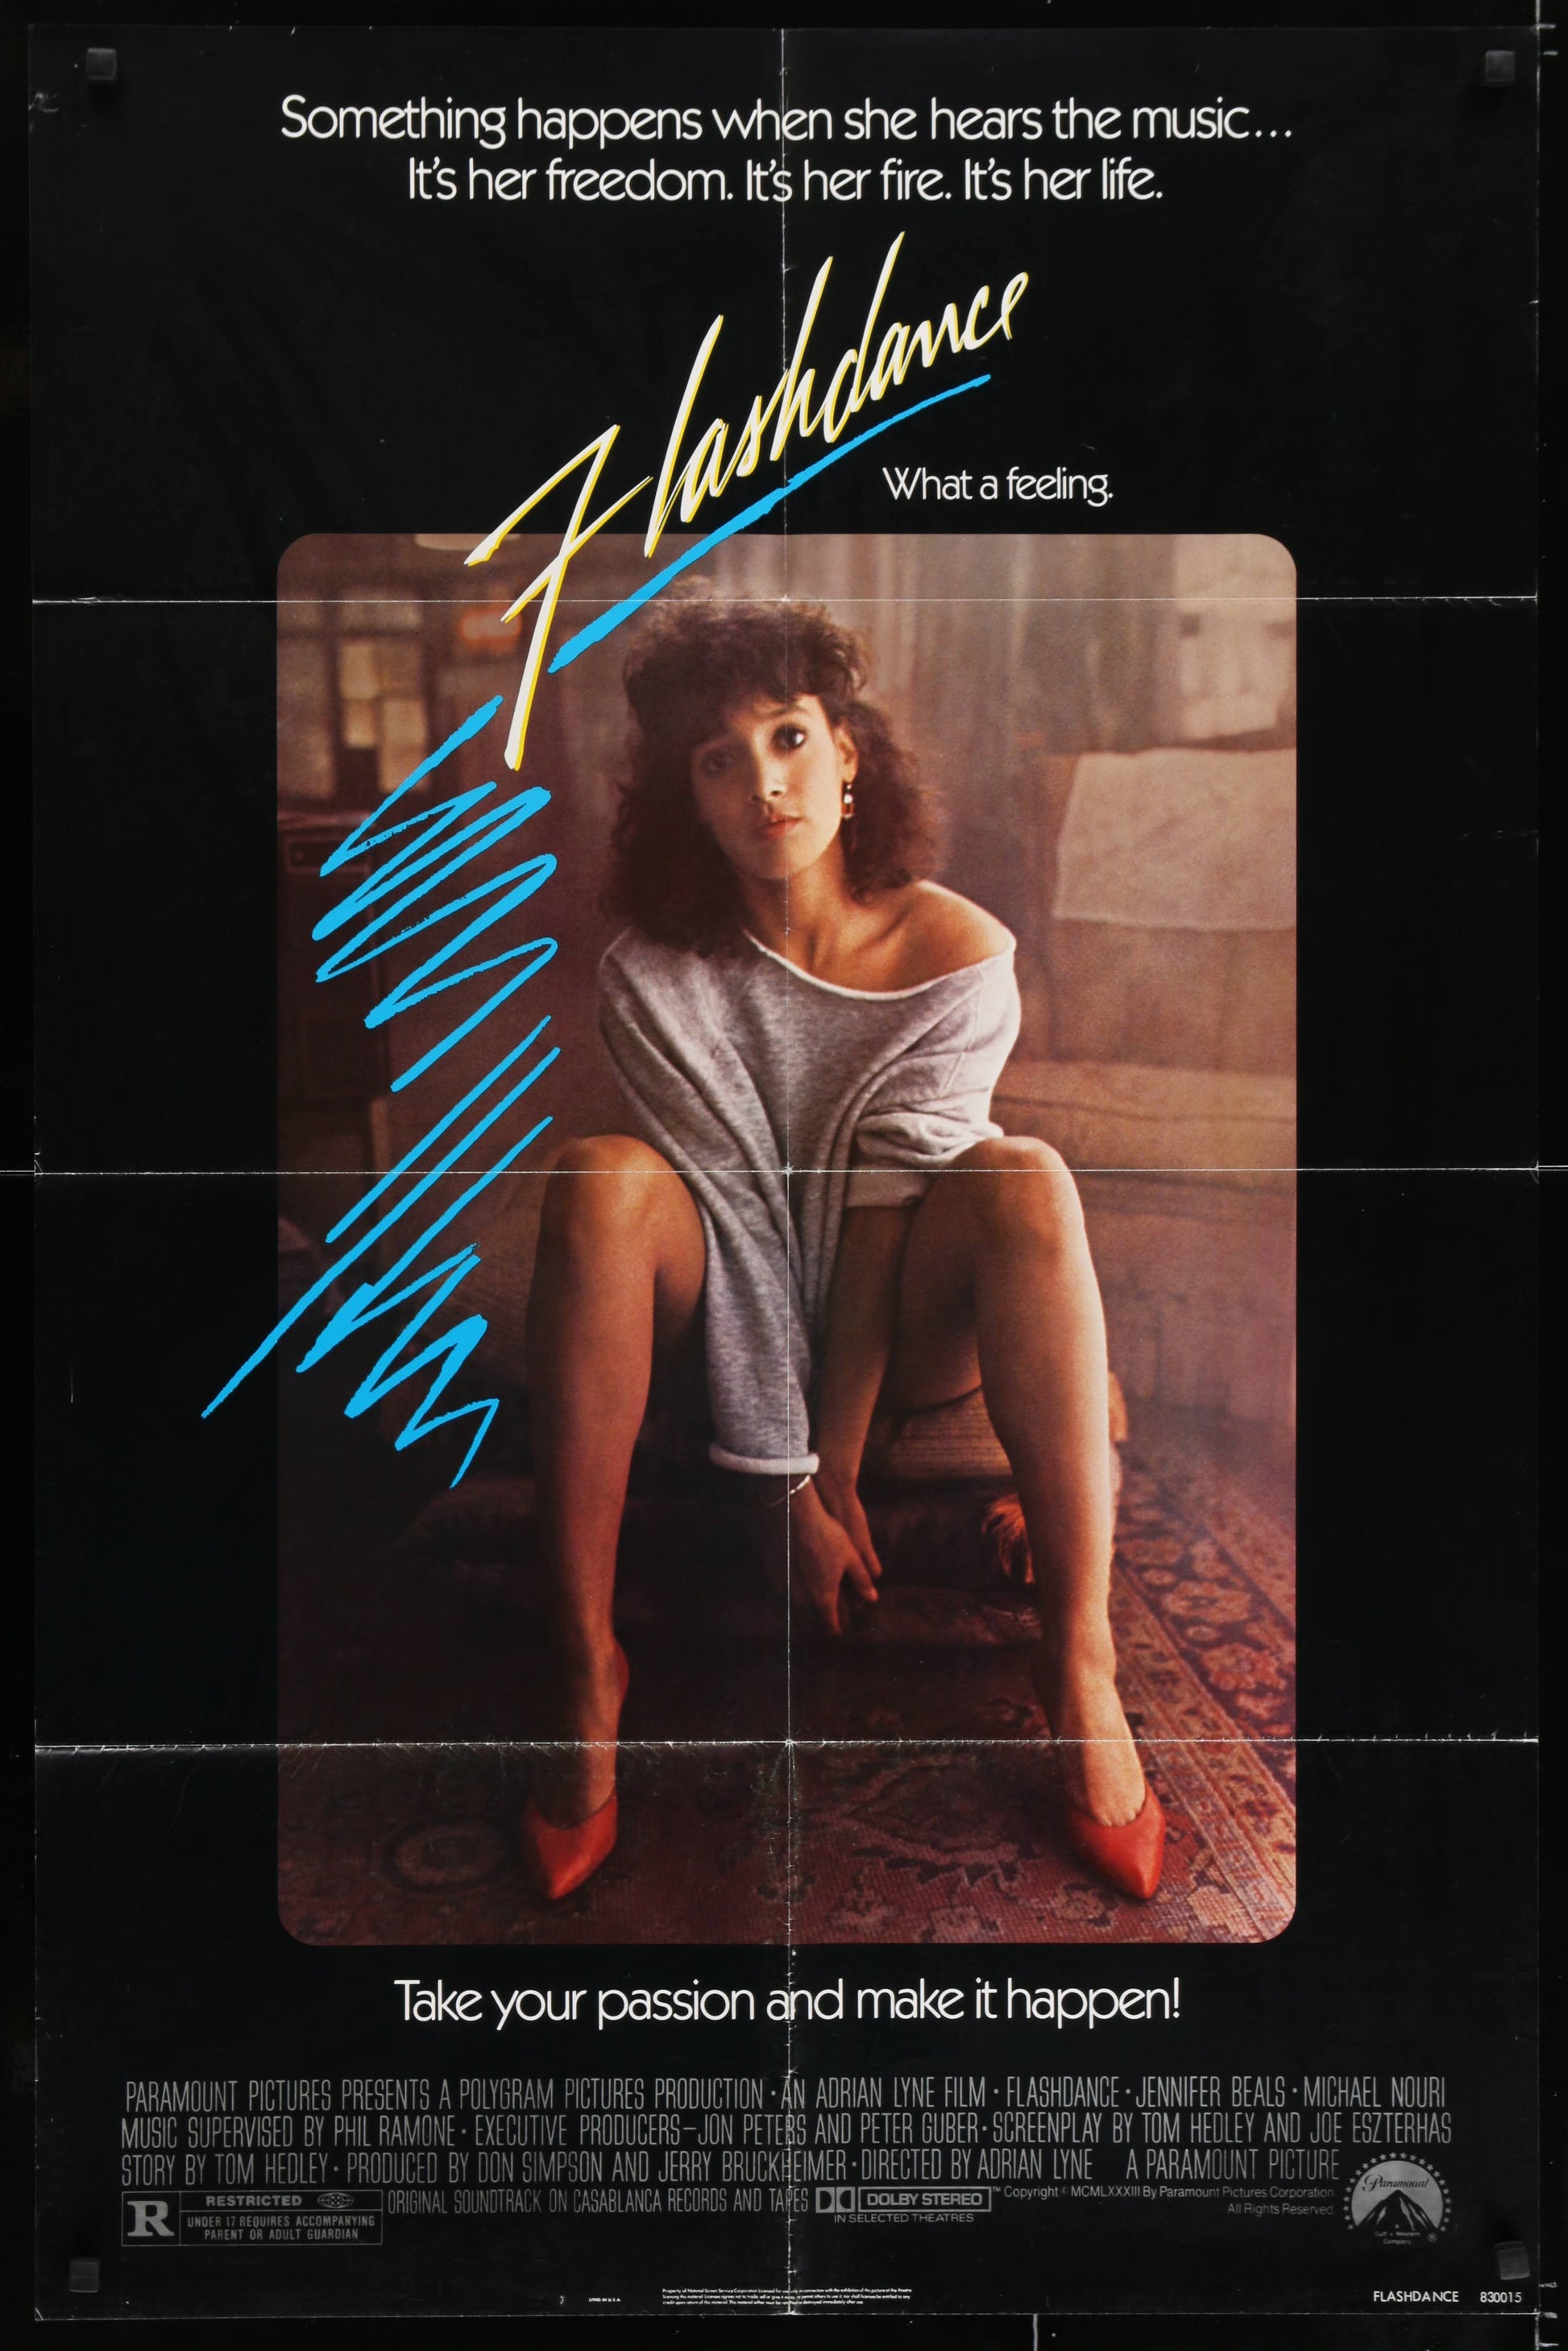 Flashdance US One Sheet (1983) - ORIGINAL RELEASE - posterpalace.com